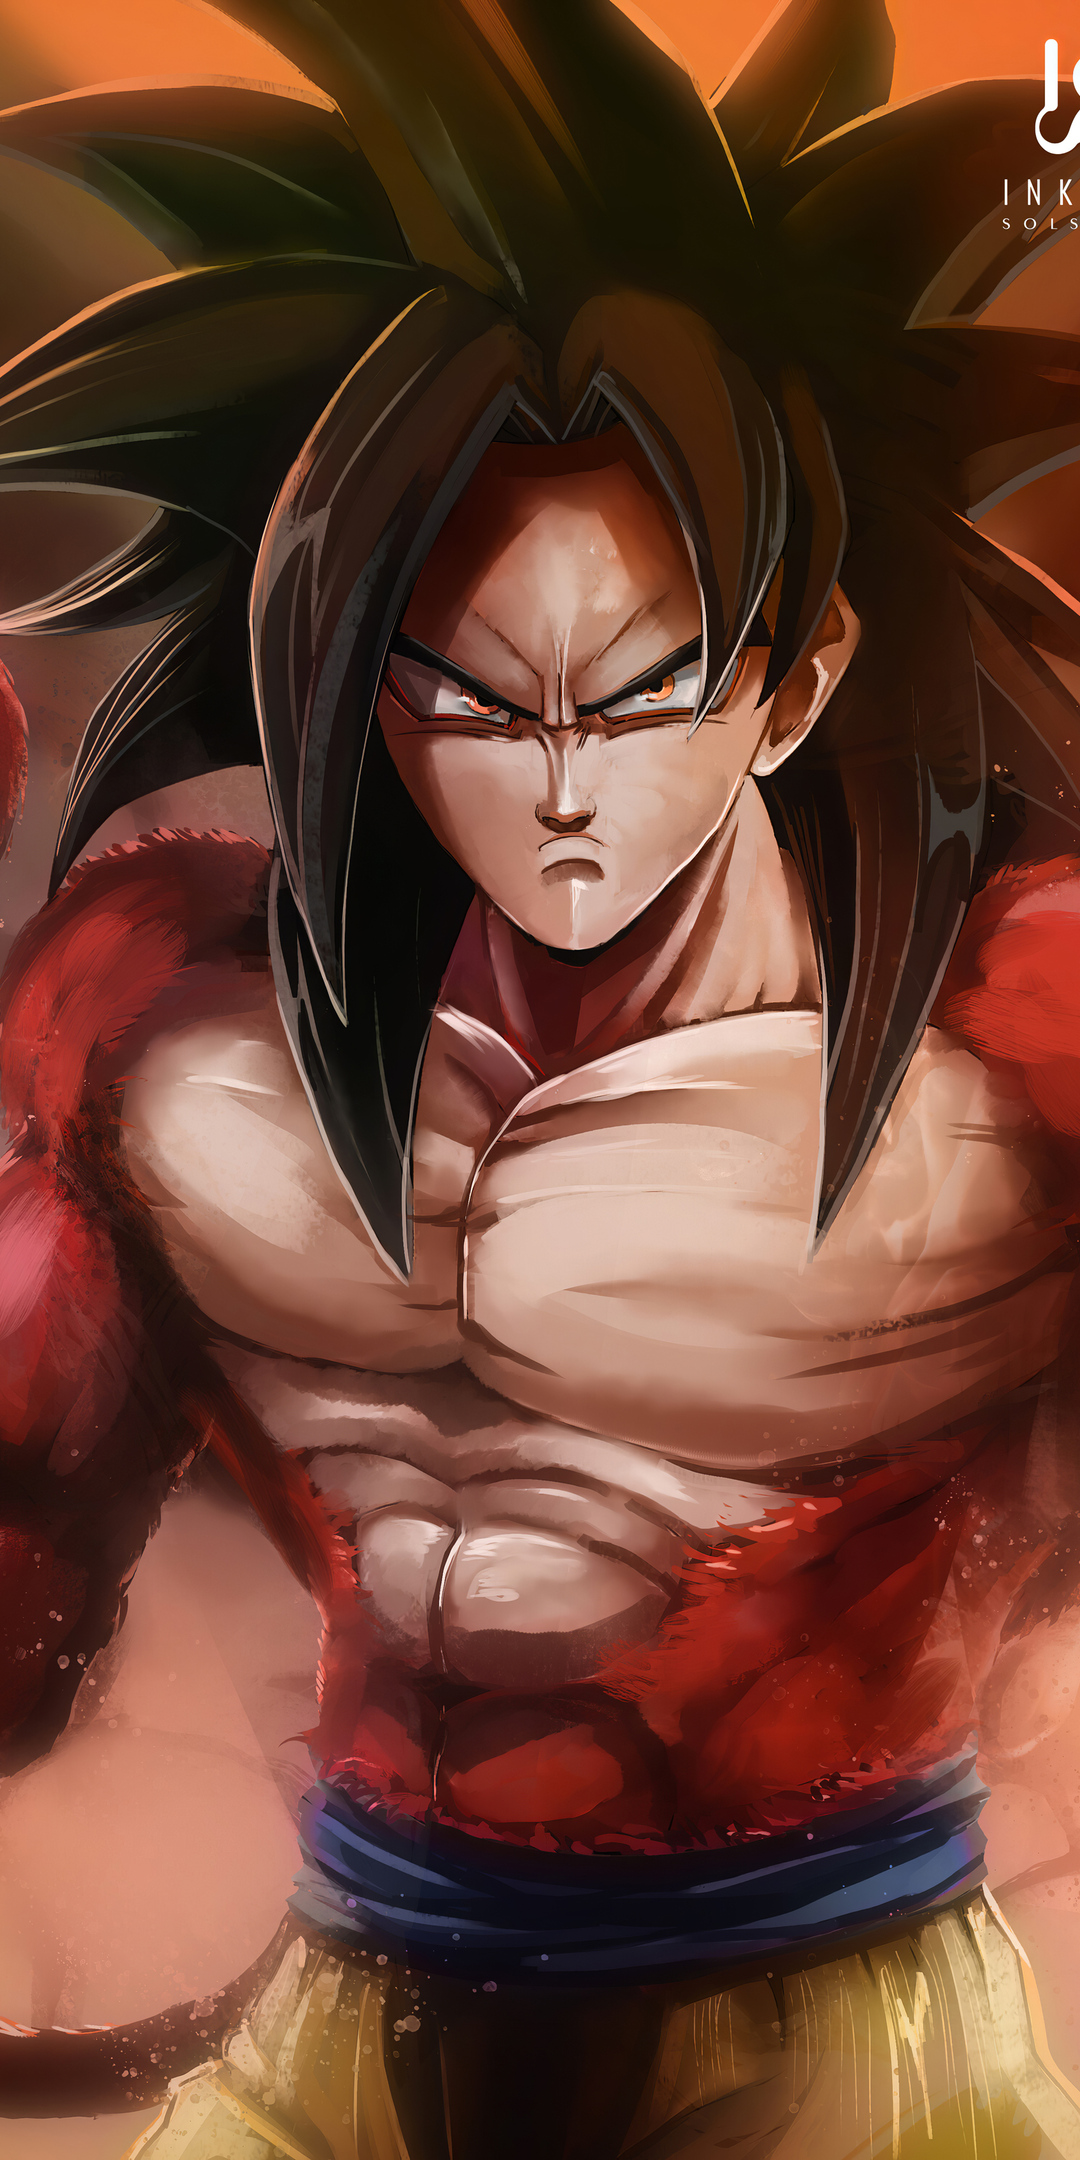 Super Saiyan 4 Goku 4k One Plus 5T, Honor 7x, Honor view Lg Q6 HD 4k Wallpaper, Image, Background, Photo and Picture